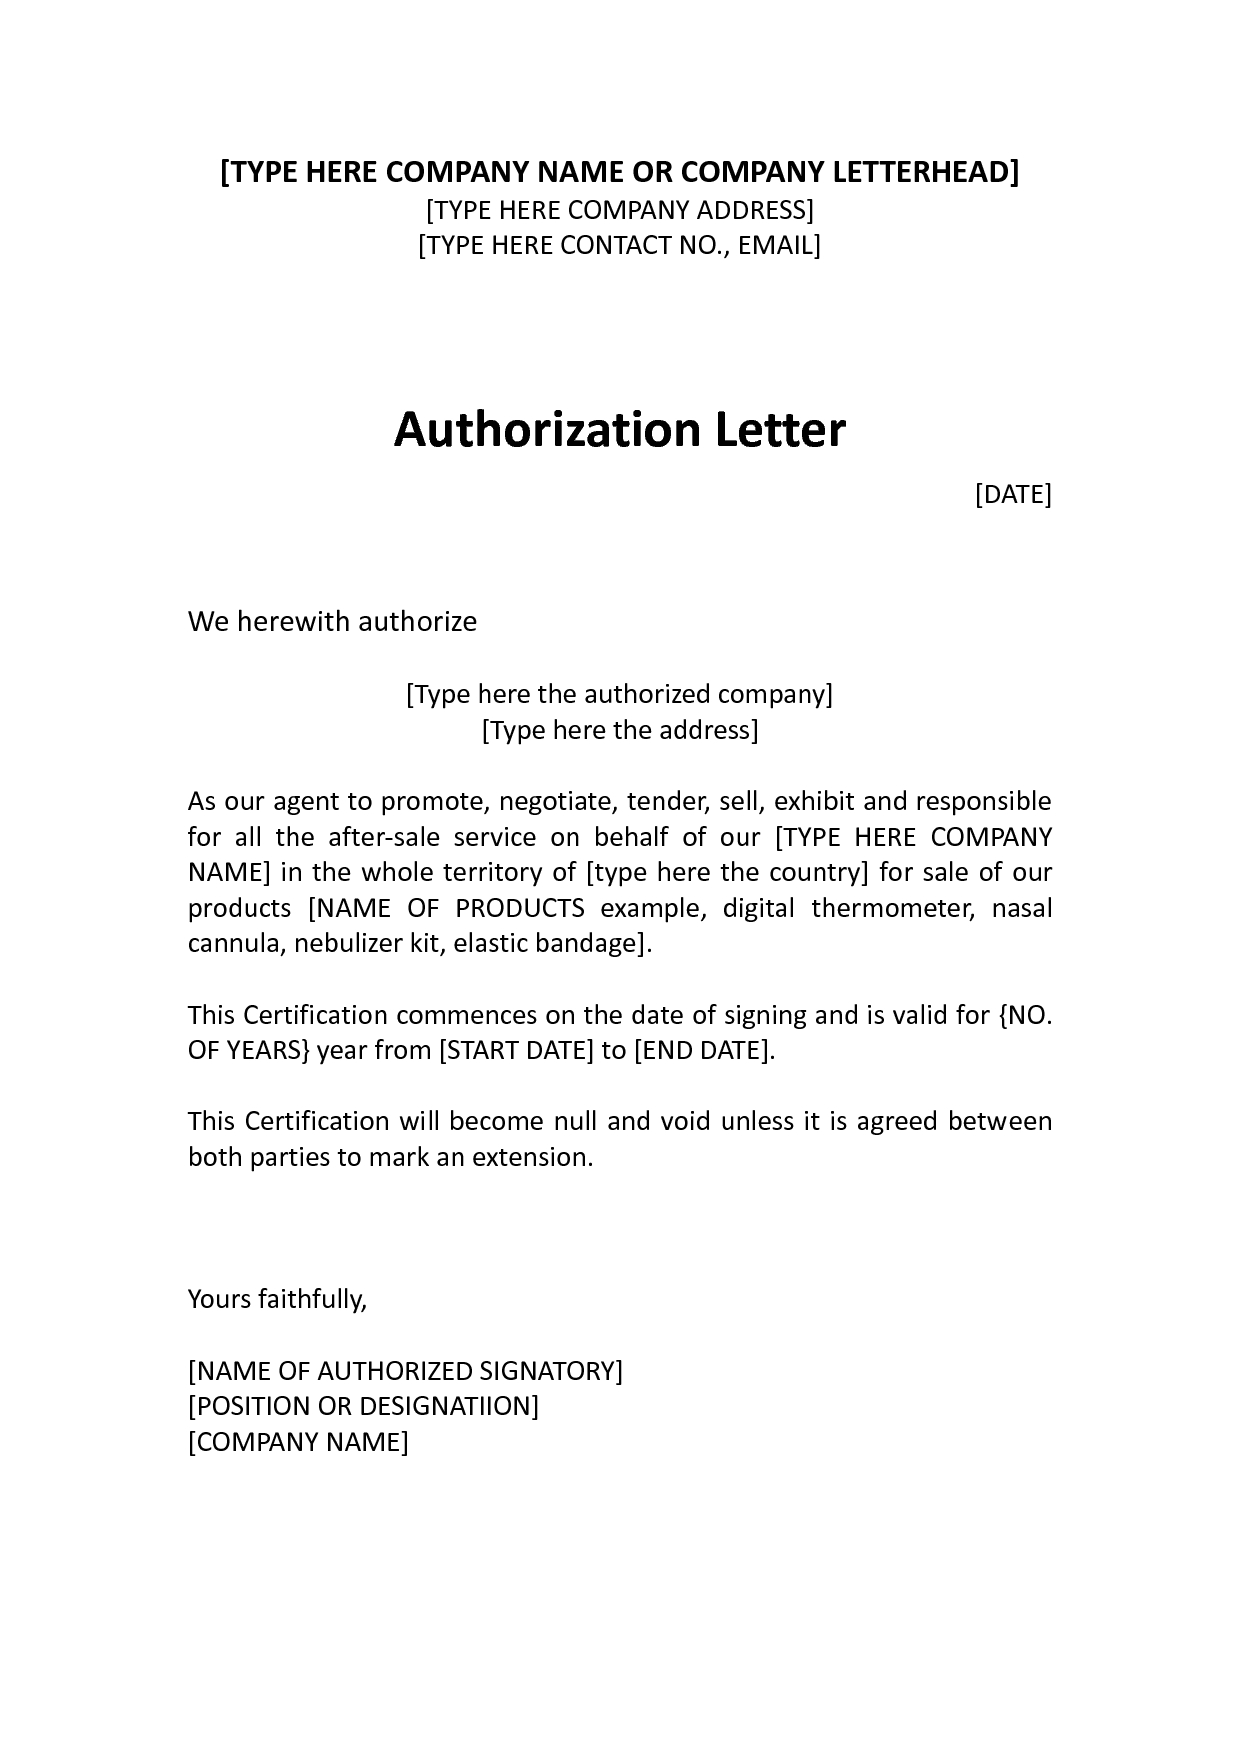 Rent Free Letter From Parents Template - Authorization Distributor Letter Sample Distributor Dealer